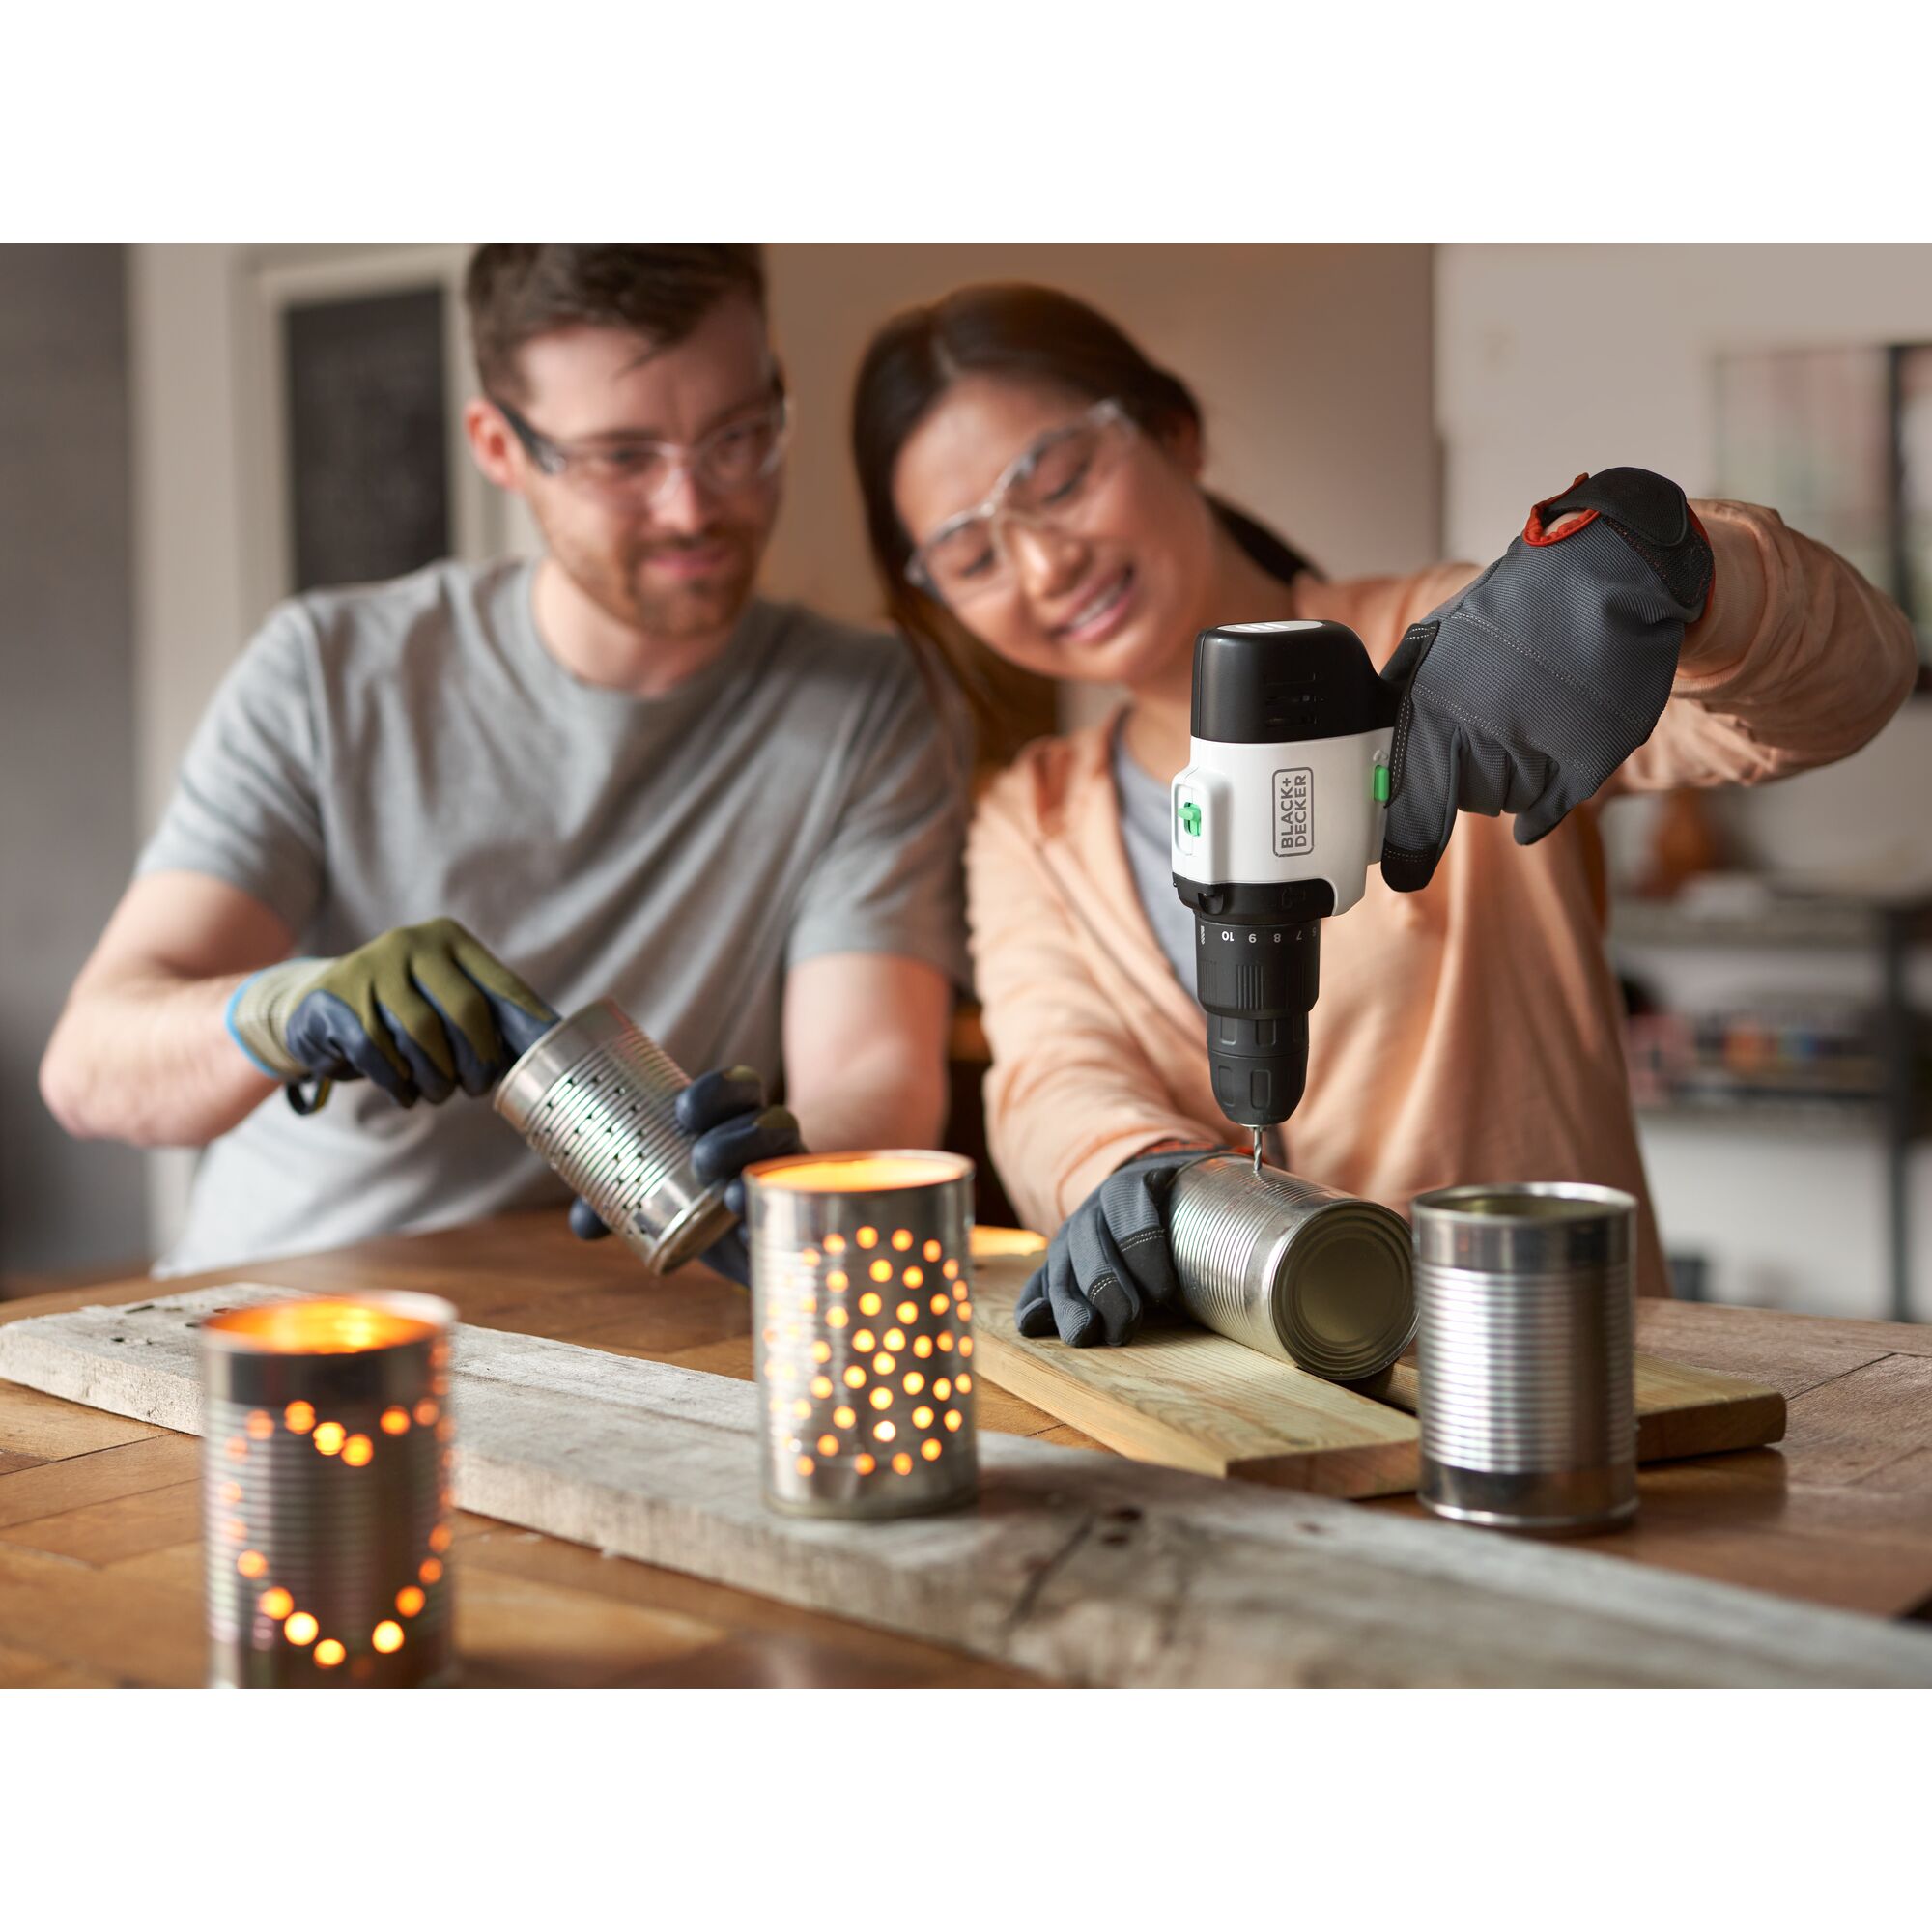 Woman using reviva™ 12V MAX* Hammer Drill/Driver to drill holes in soup cans for a craft project with her husband.